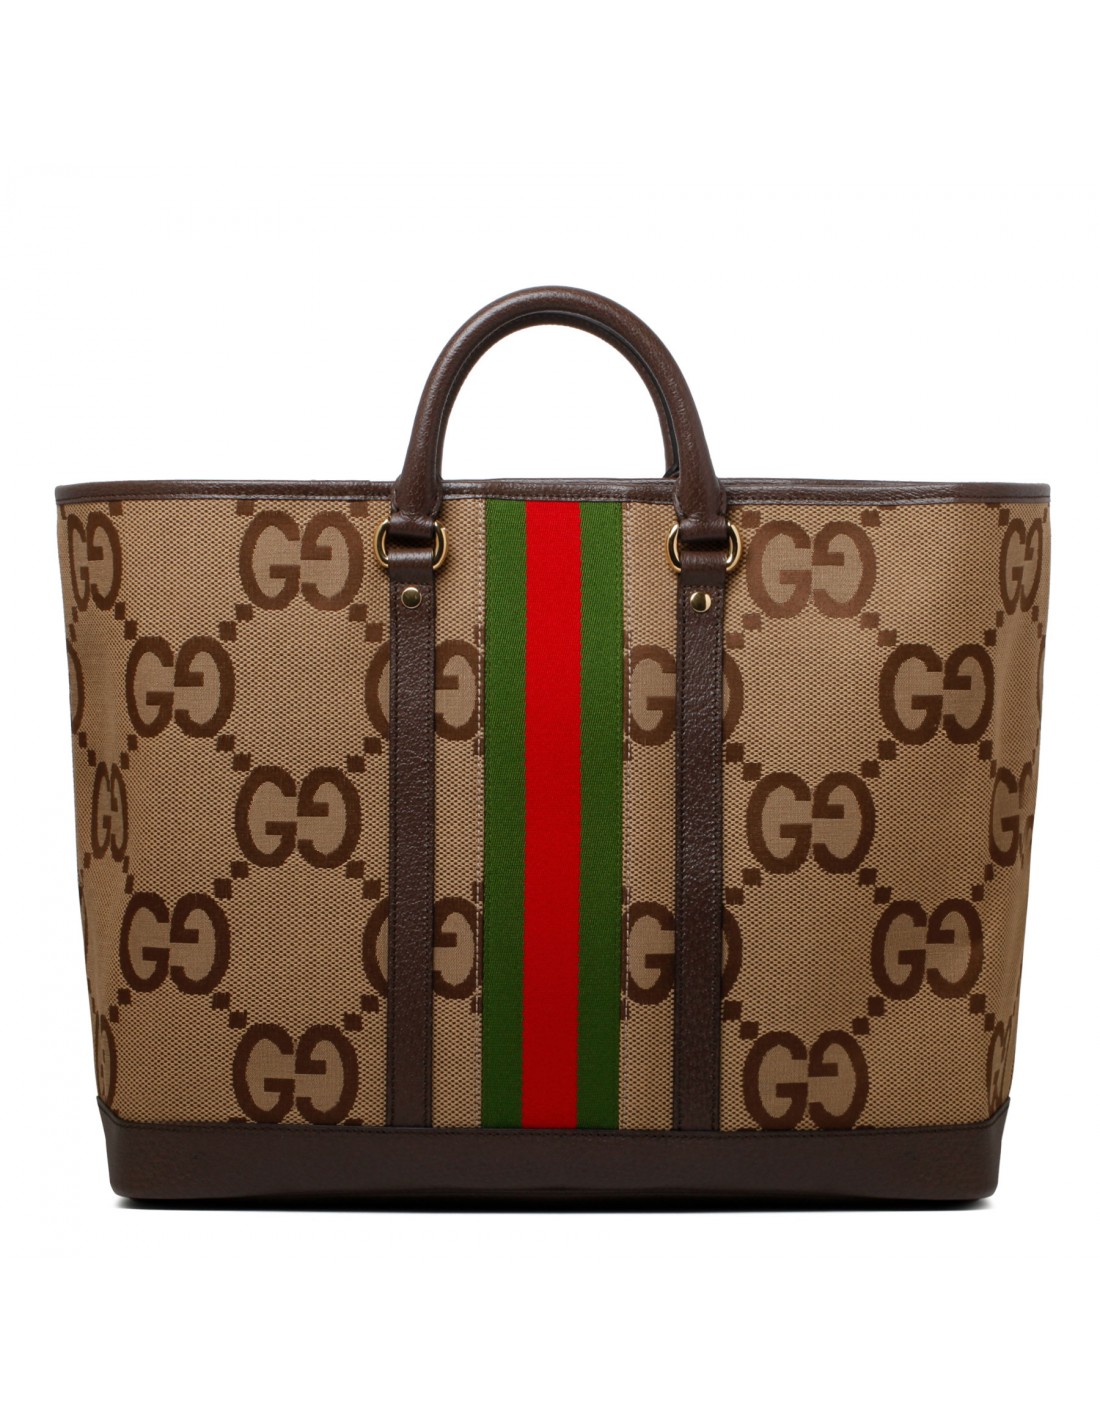 GUCCI Ophidia medium leather-trimmed printed coated-canvas tote |  NET-A-PORTER